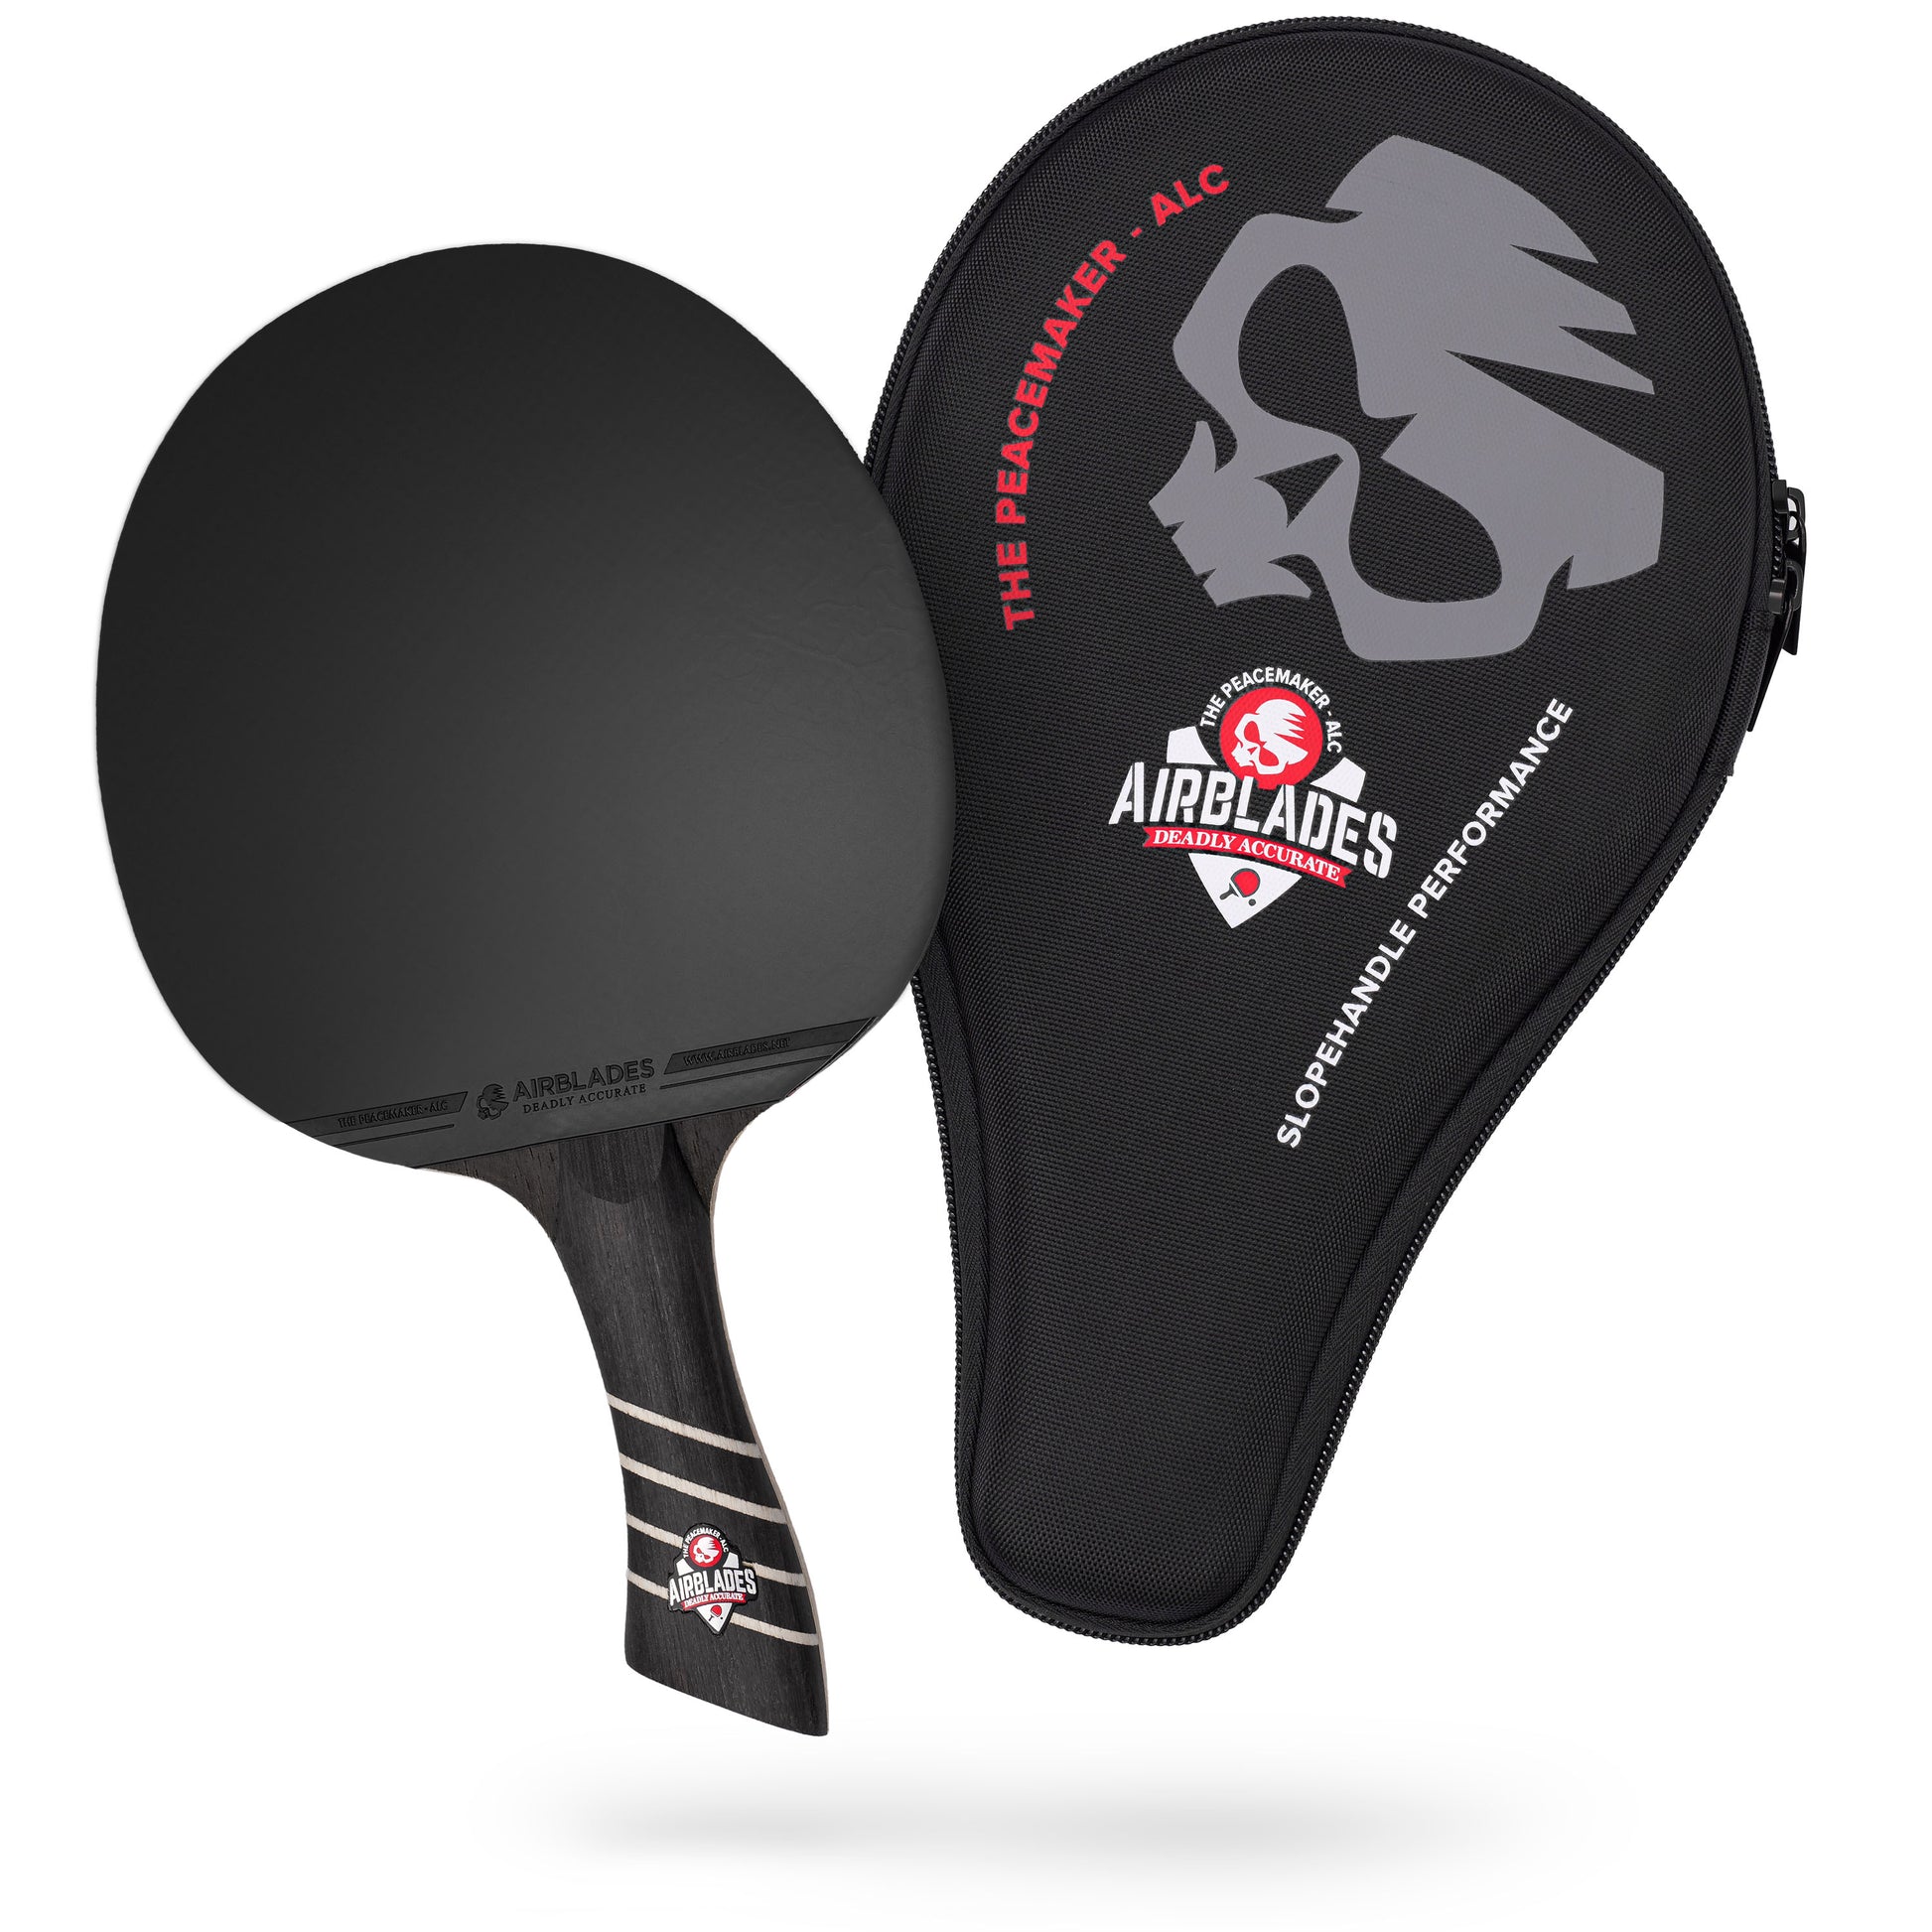 Browse Free HD Images of Hand Holding Red Ping Pong Paddle On Grey